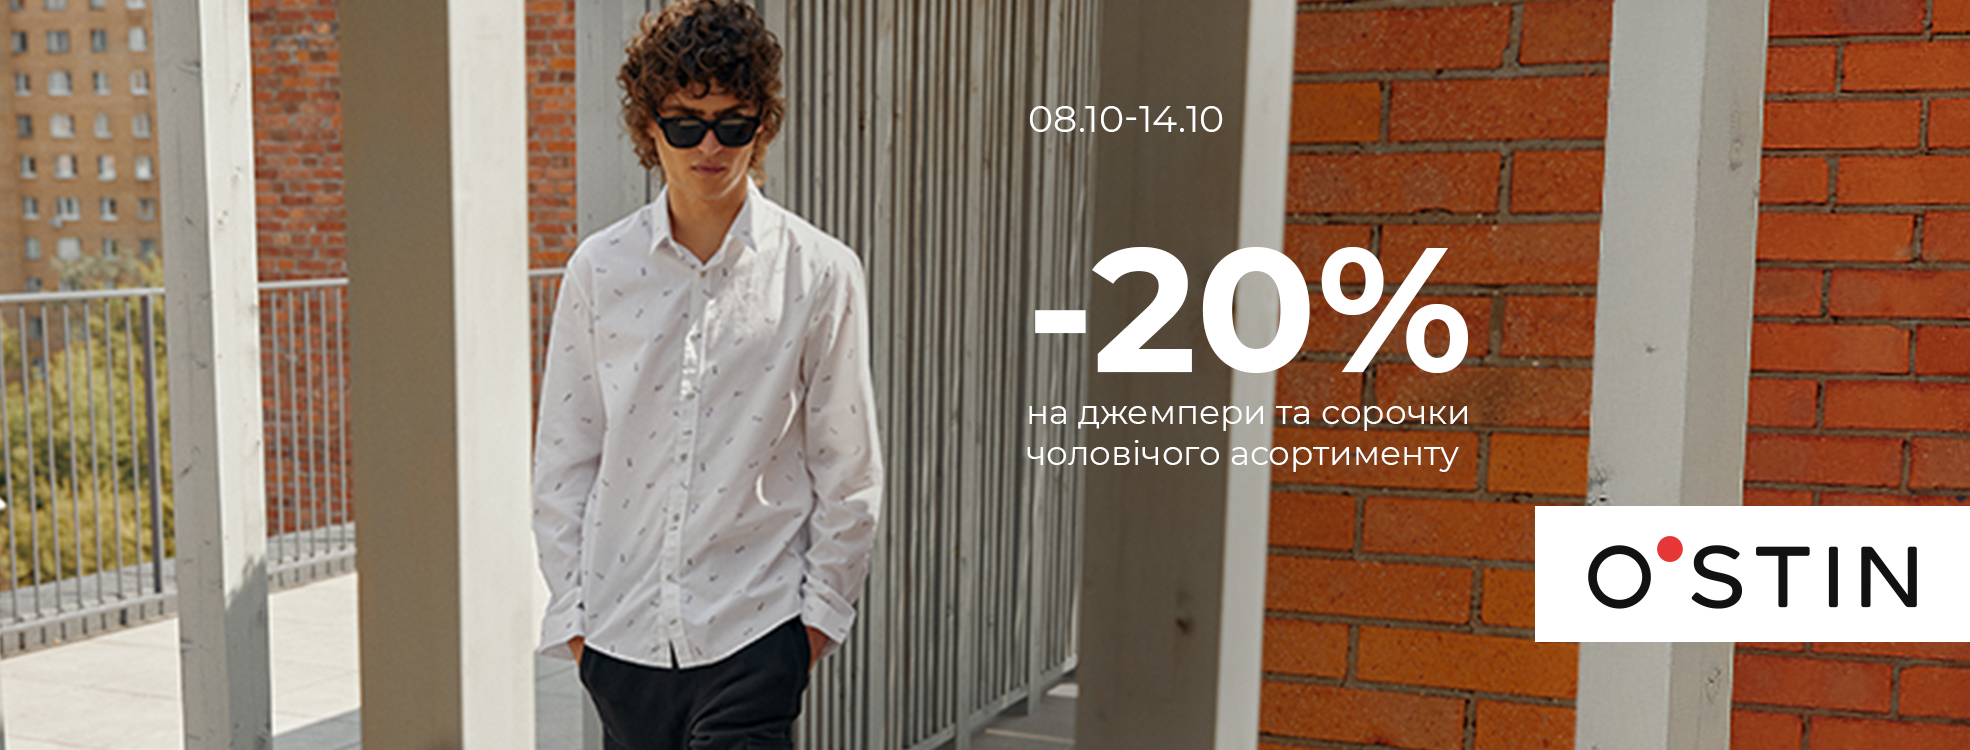 -20% on jumpers and shirts at O'STIN